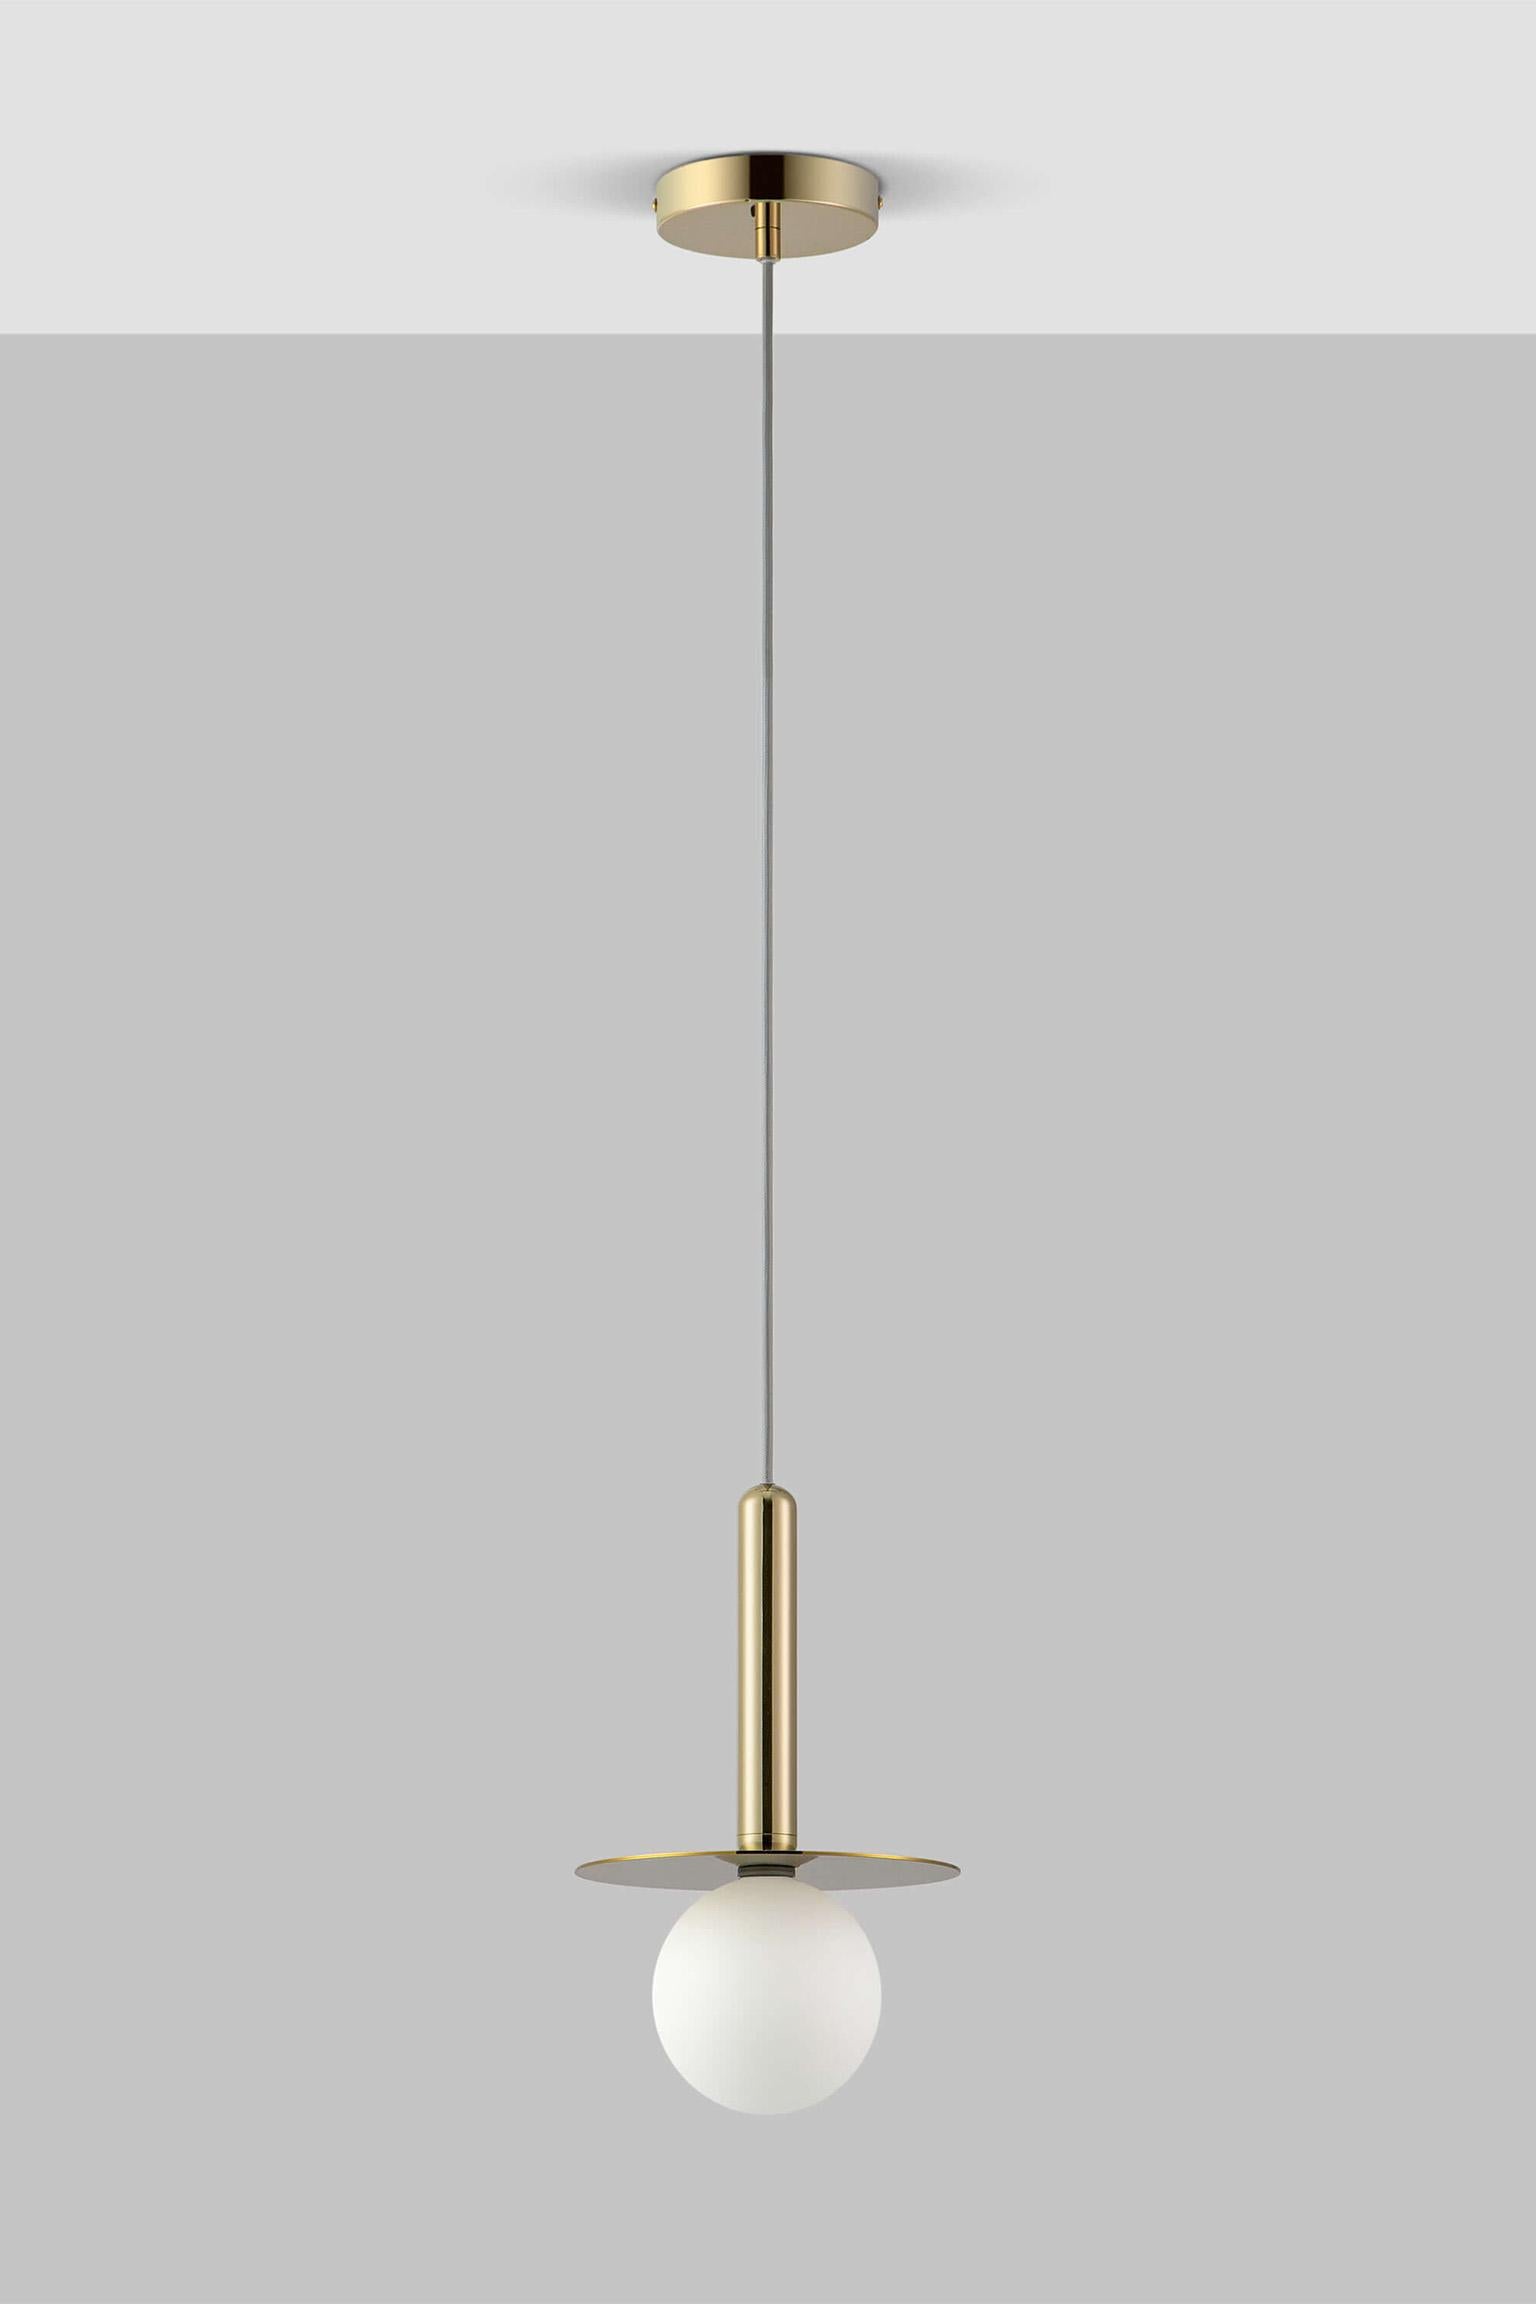 Illuminate your home with our brass plate pendant ceiling light, a stunning adjustable drop-down fixture that combines three geometric shapes which create a practical yet stylish, sleek and modern look. The versatile ceiling light is IP44 rated and